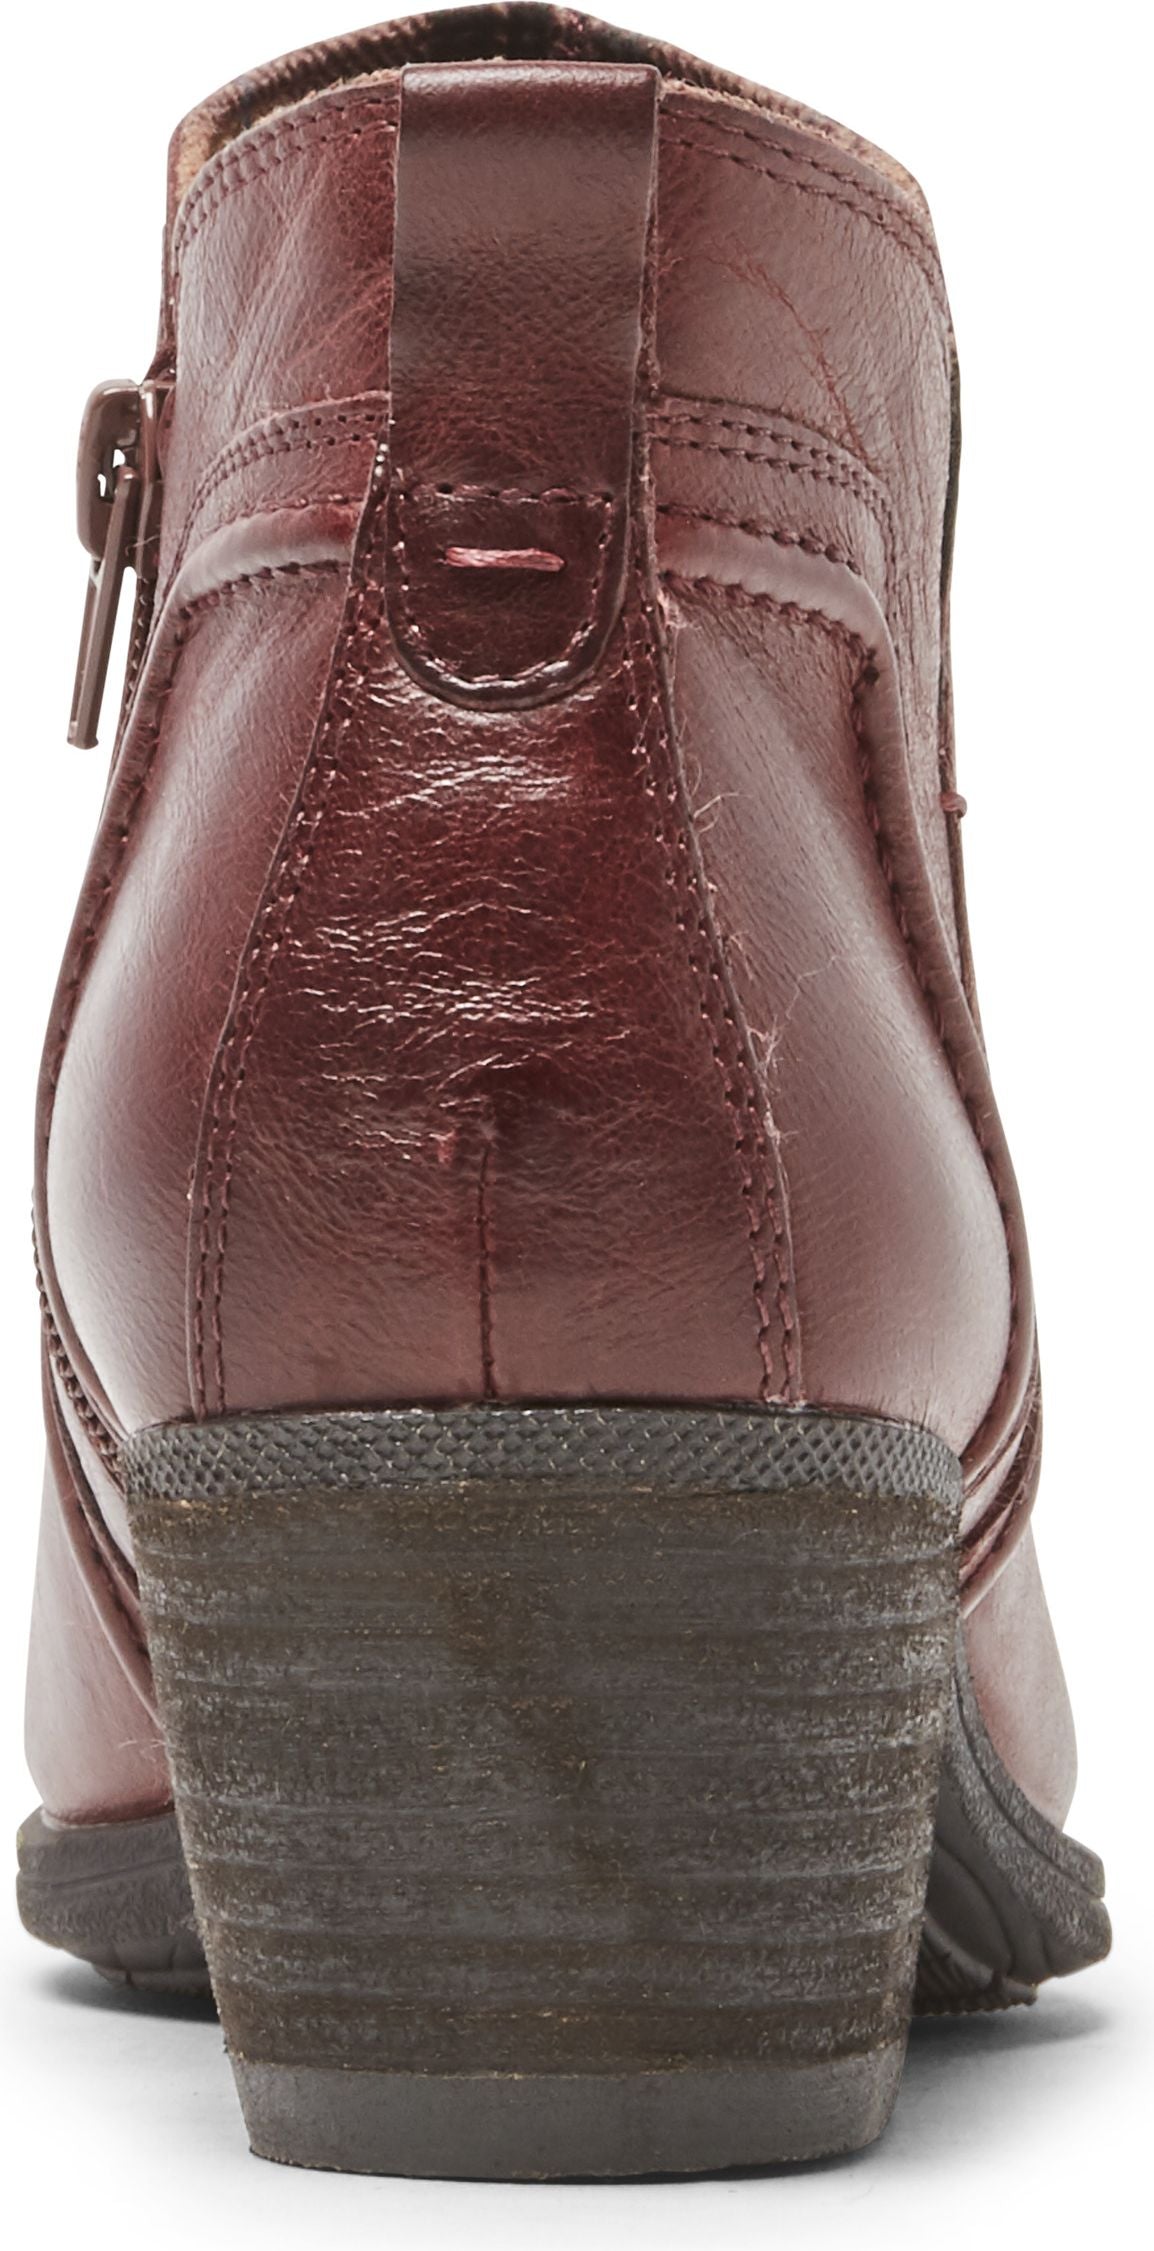 Cobb Hill Boots Anisa Vcut Bootie Burgundy - Wide